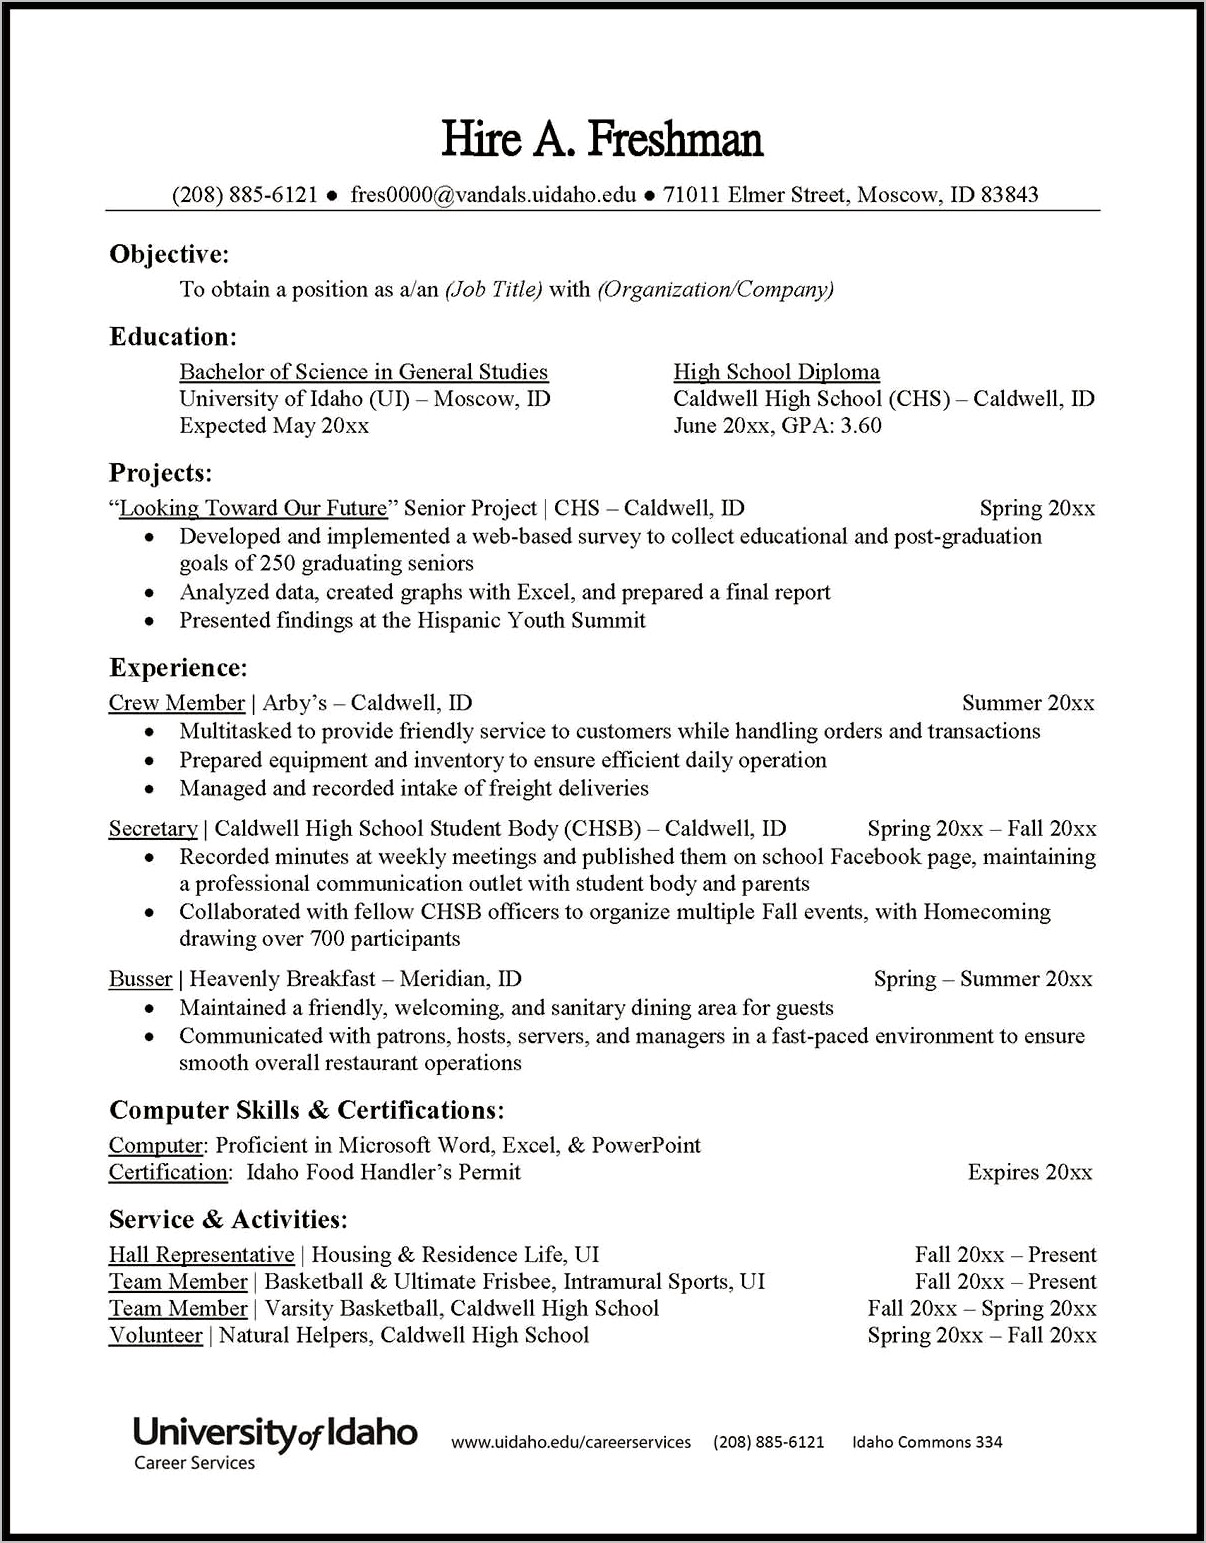 Resume For A Highschool Student For Work Study